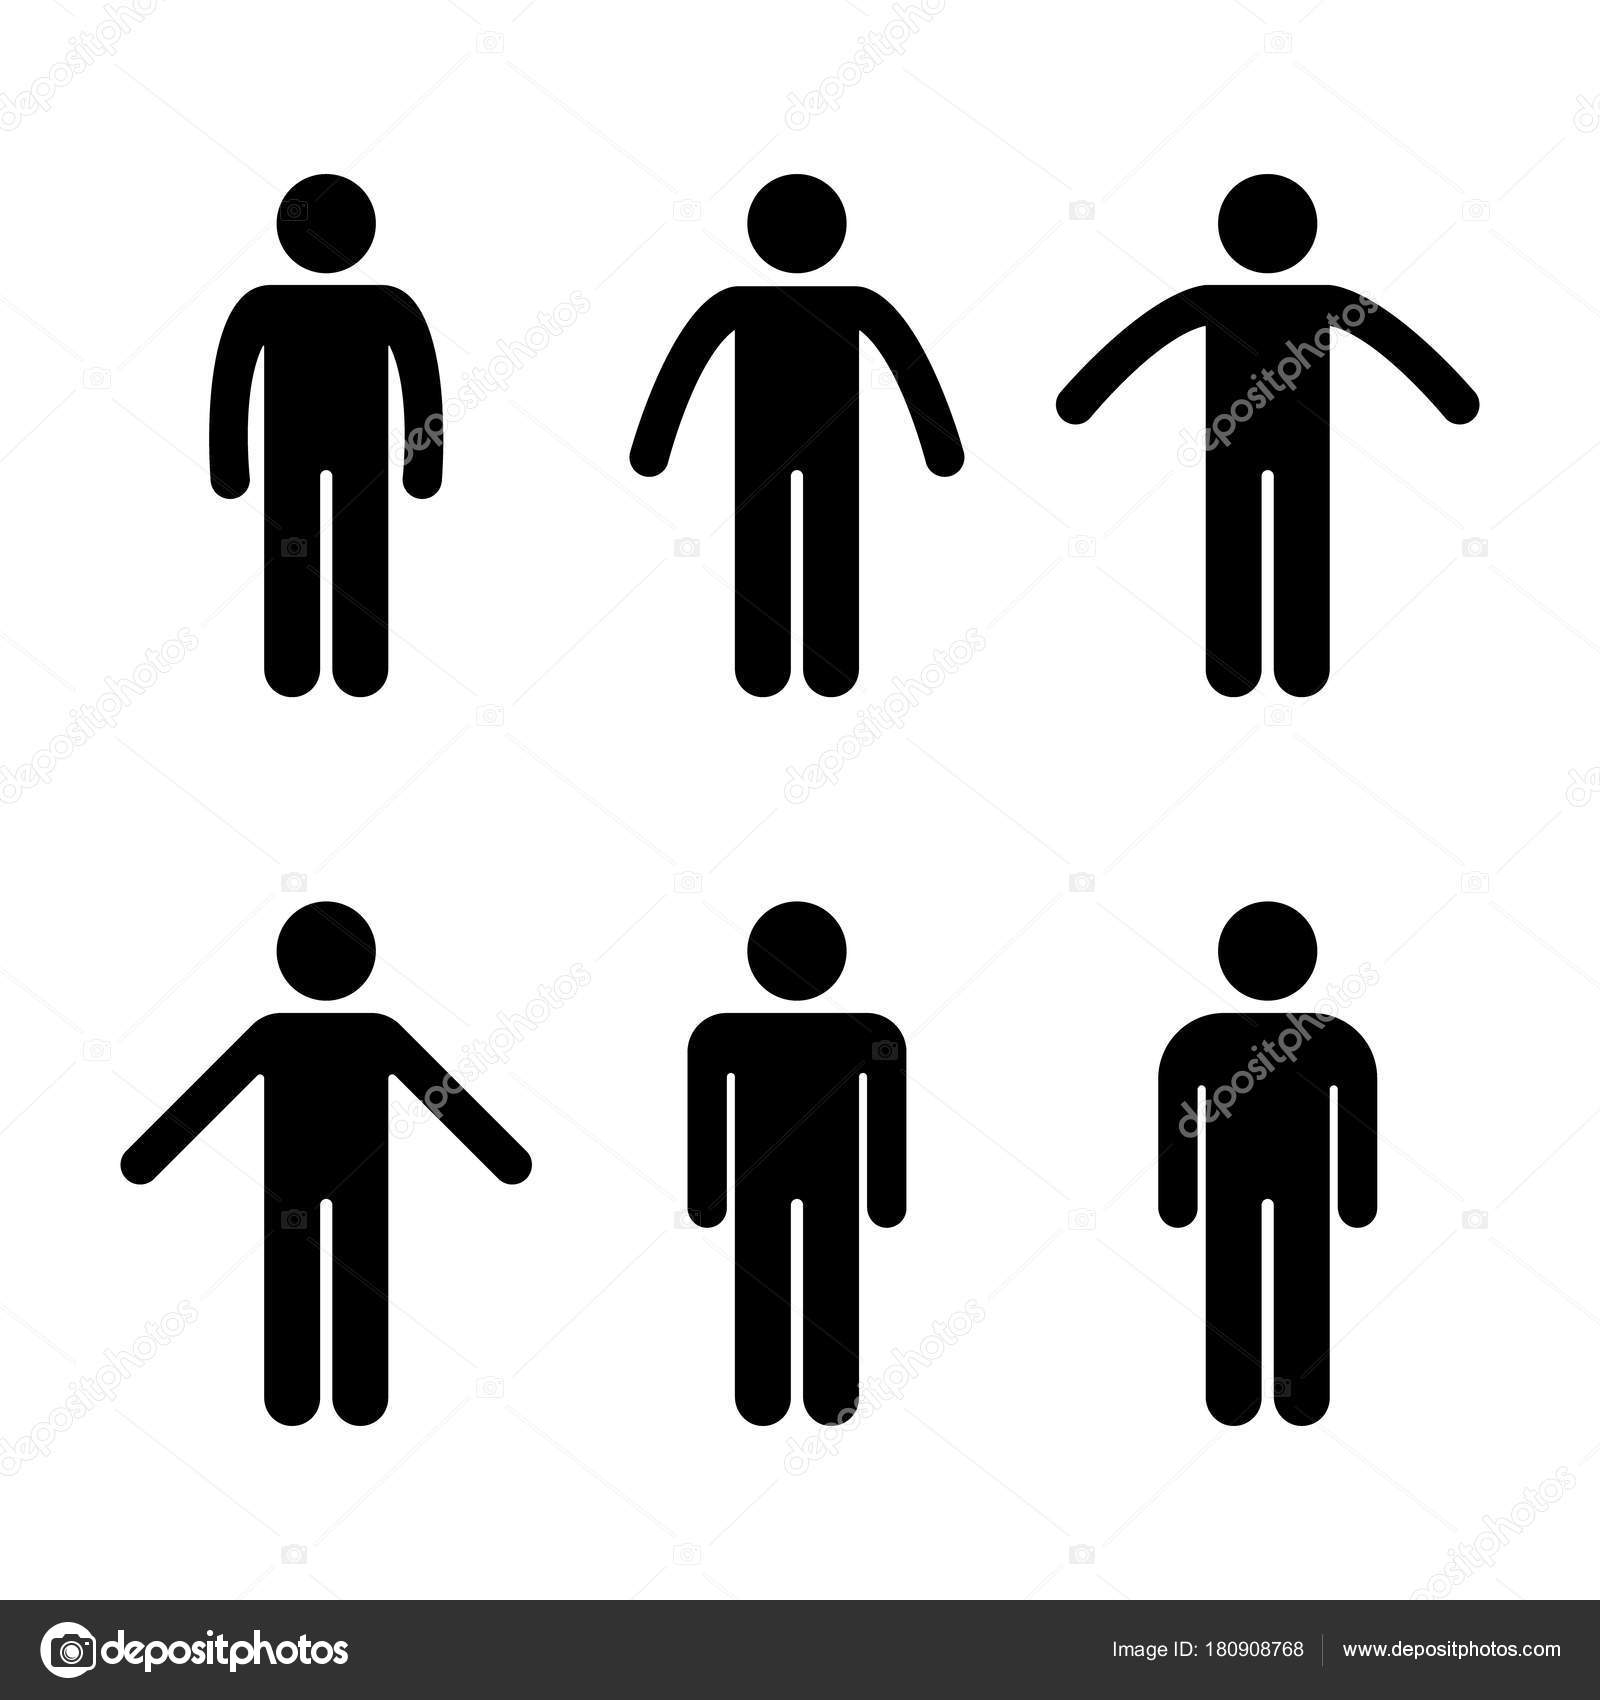 Stick figure in thinking posture. Stick man thinking about a solution to a  question. Vector illustration isolated on white Stock Vector